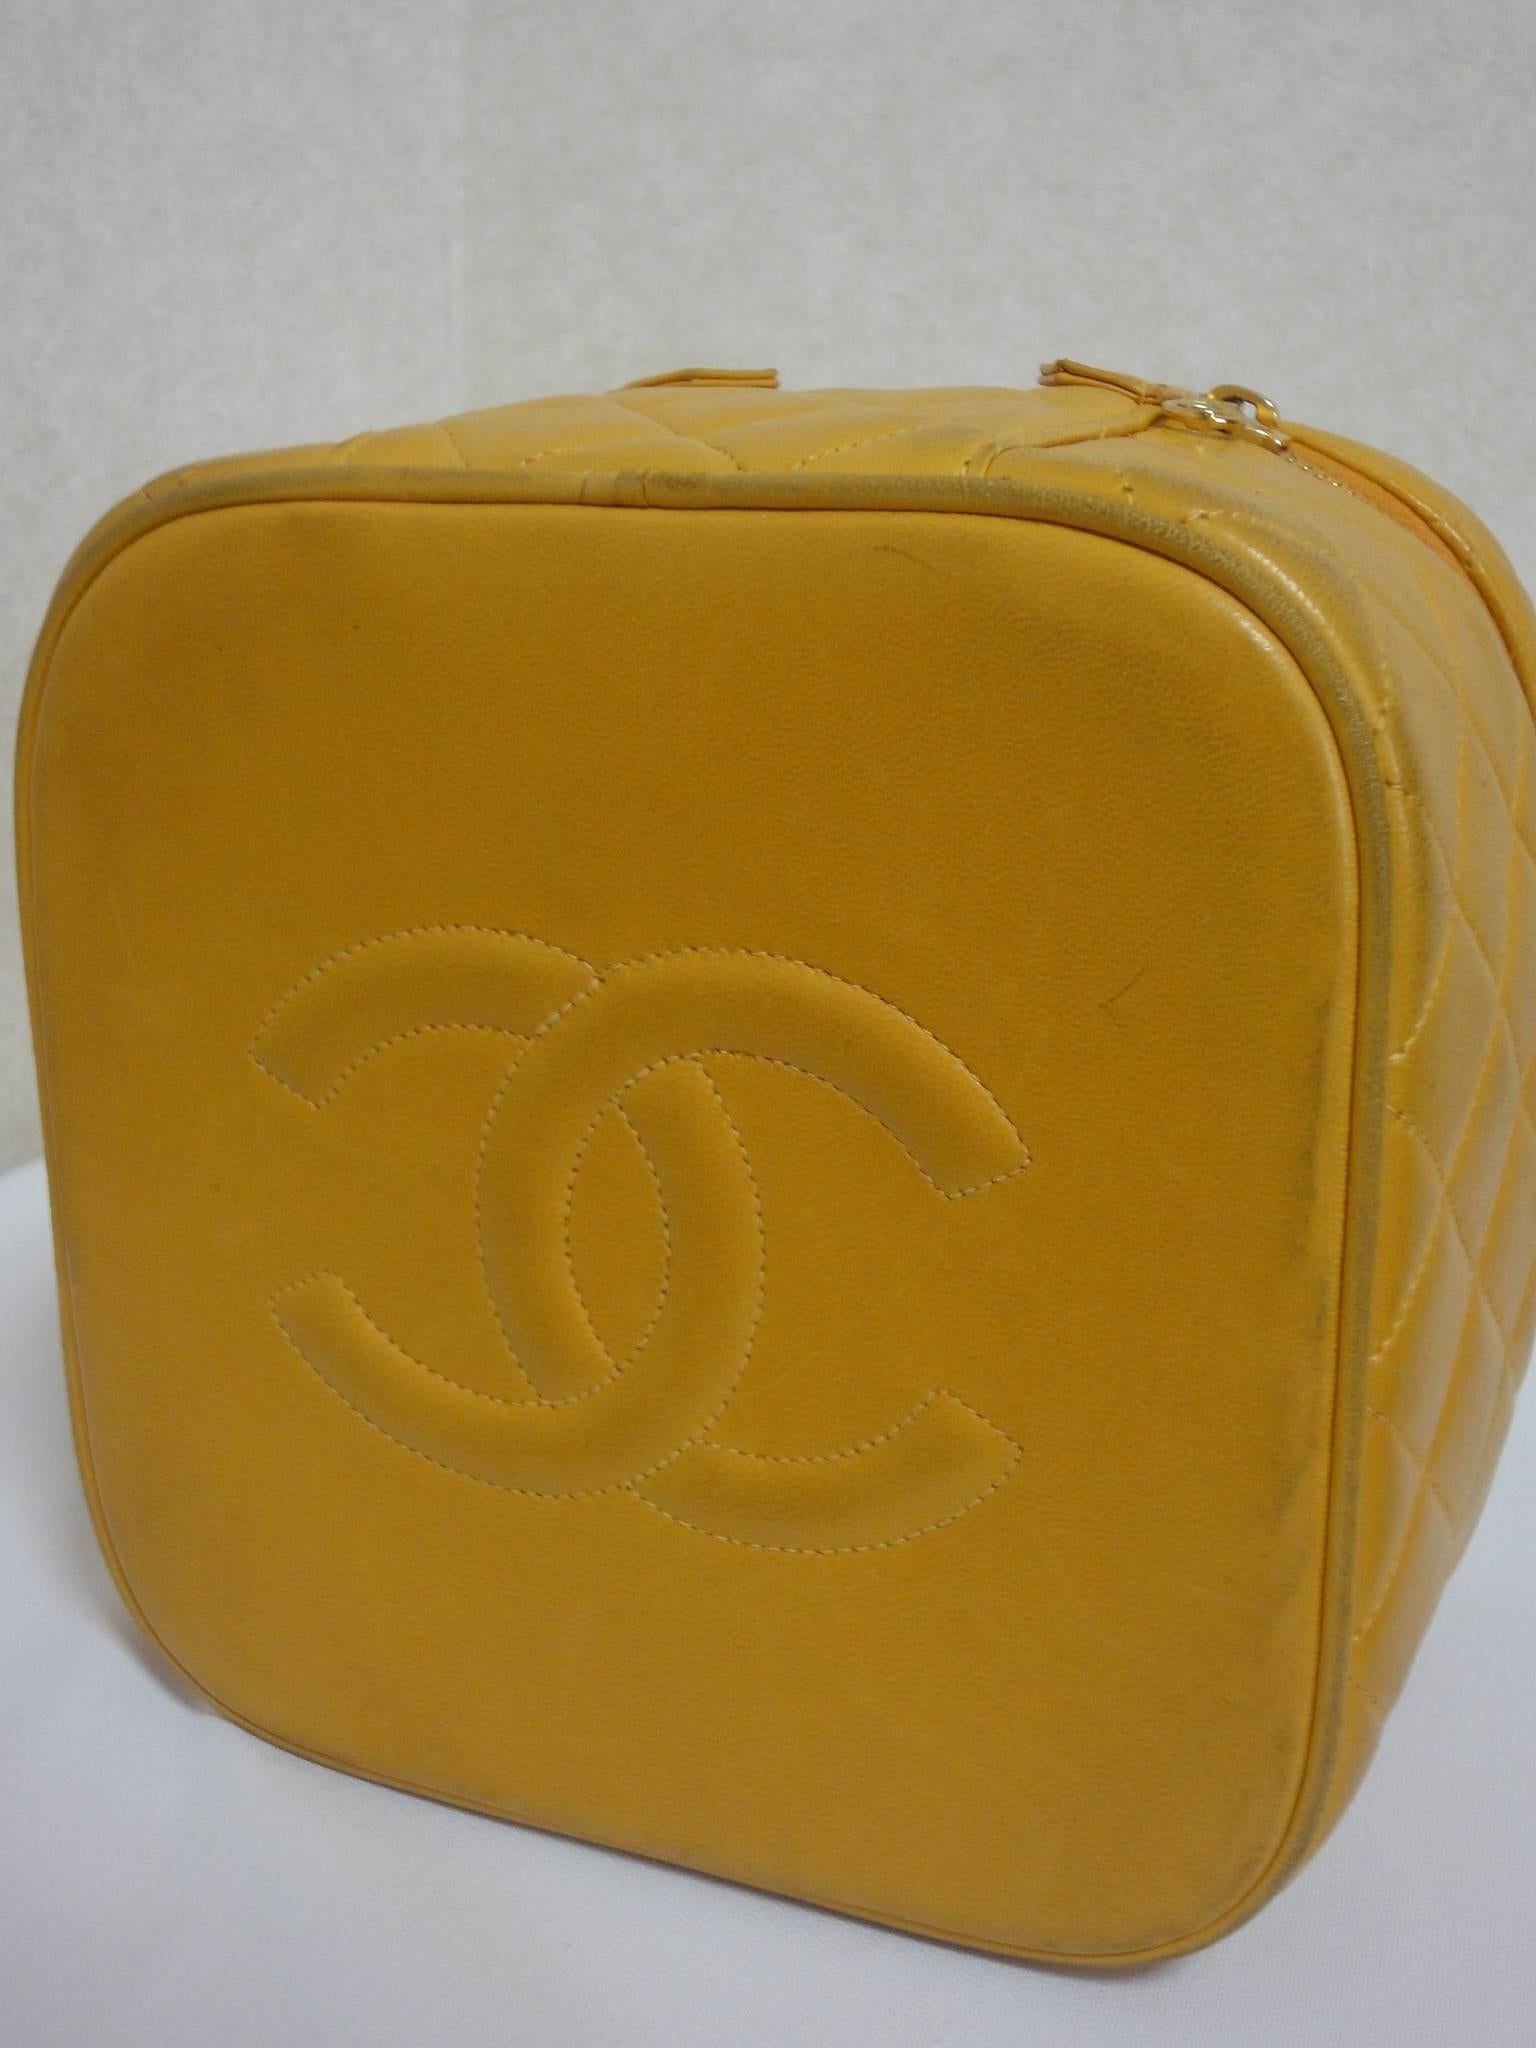 Vintage CHANEL yellow quilted lambskin cosmetic, make up case, vanity bag with CC mark at bottom. Can be a mini handbag. Get a lucky color.

Introducing a vintage CHANEL yellow color mini vanity bag that can be a multi-purpose purse such as